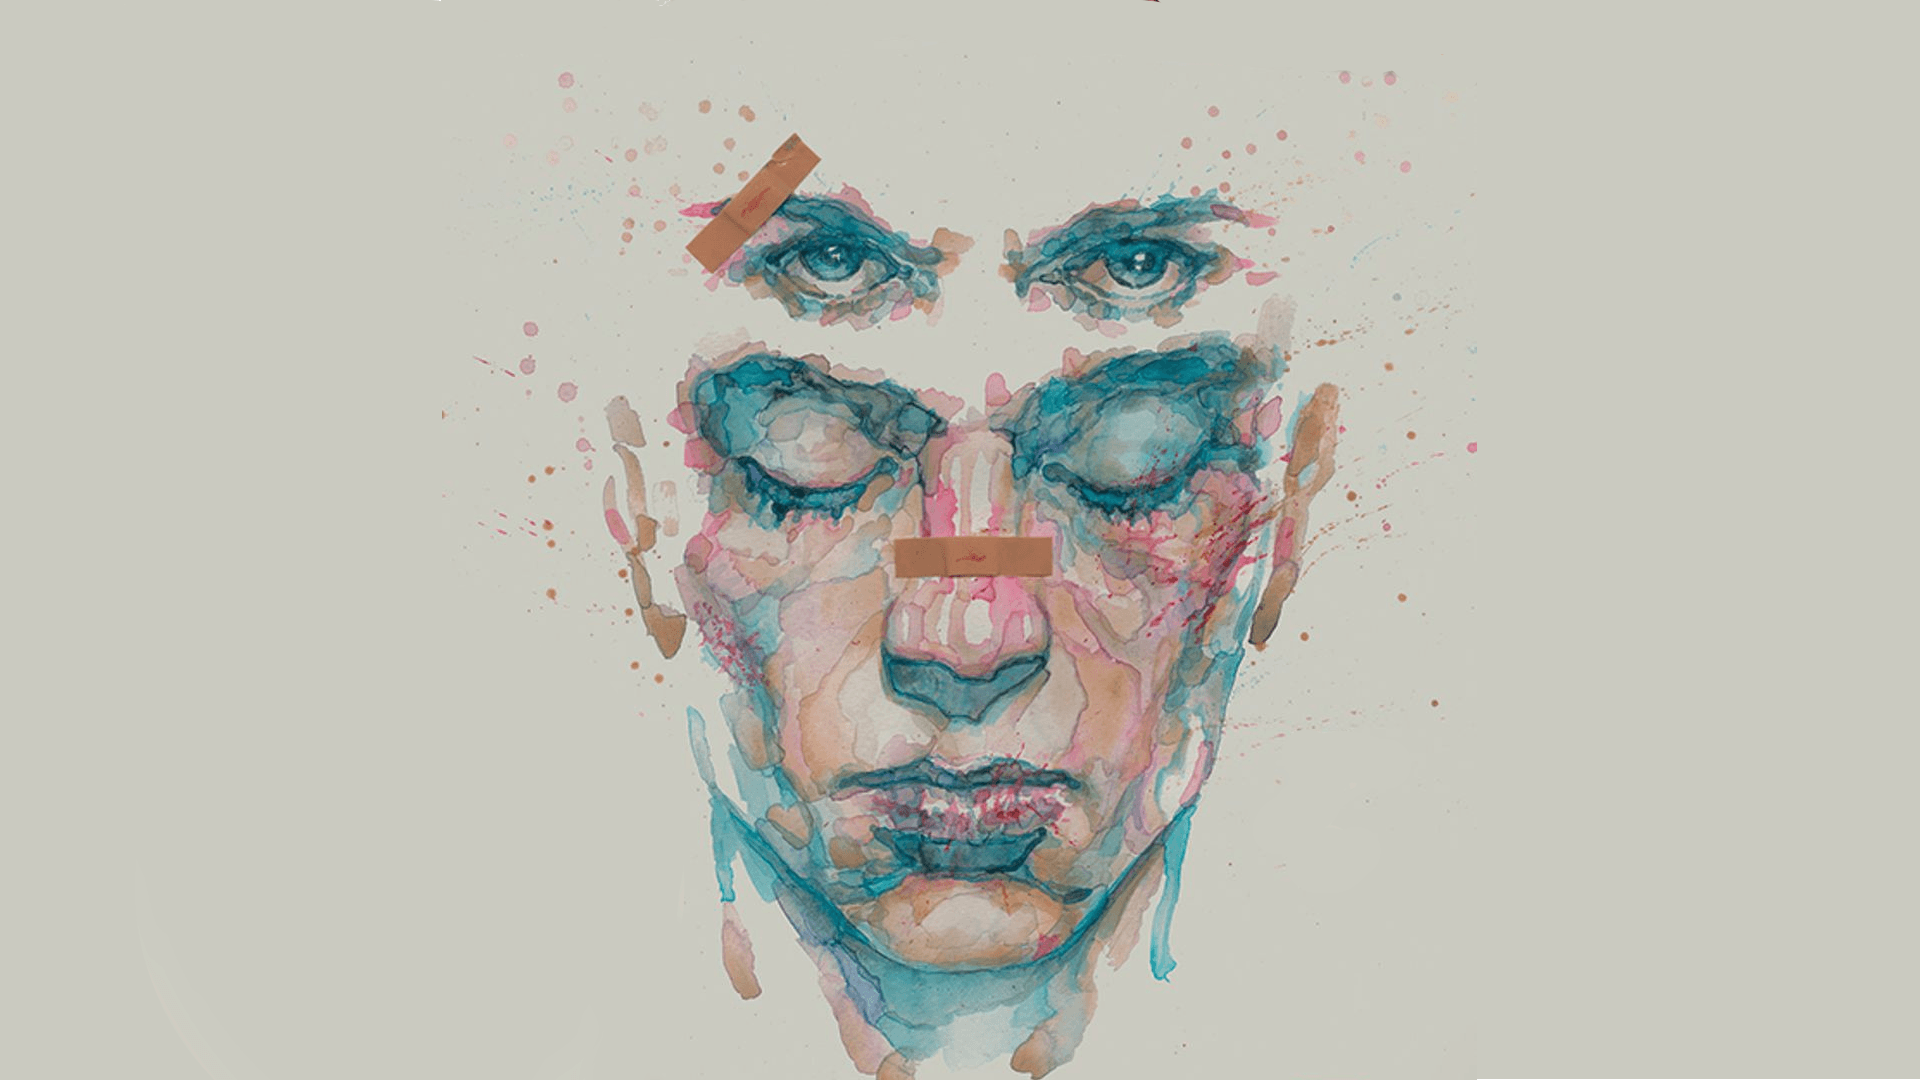 Fight Club 2 Issue 1 Wallpaper